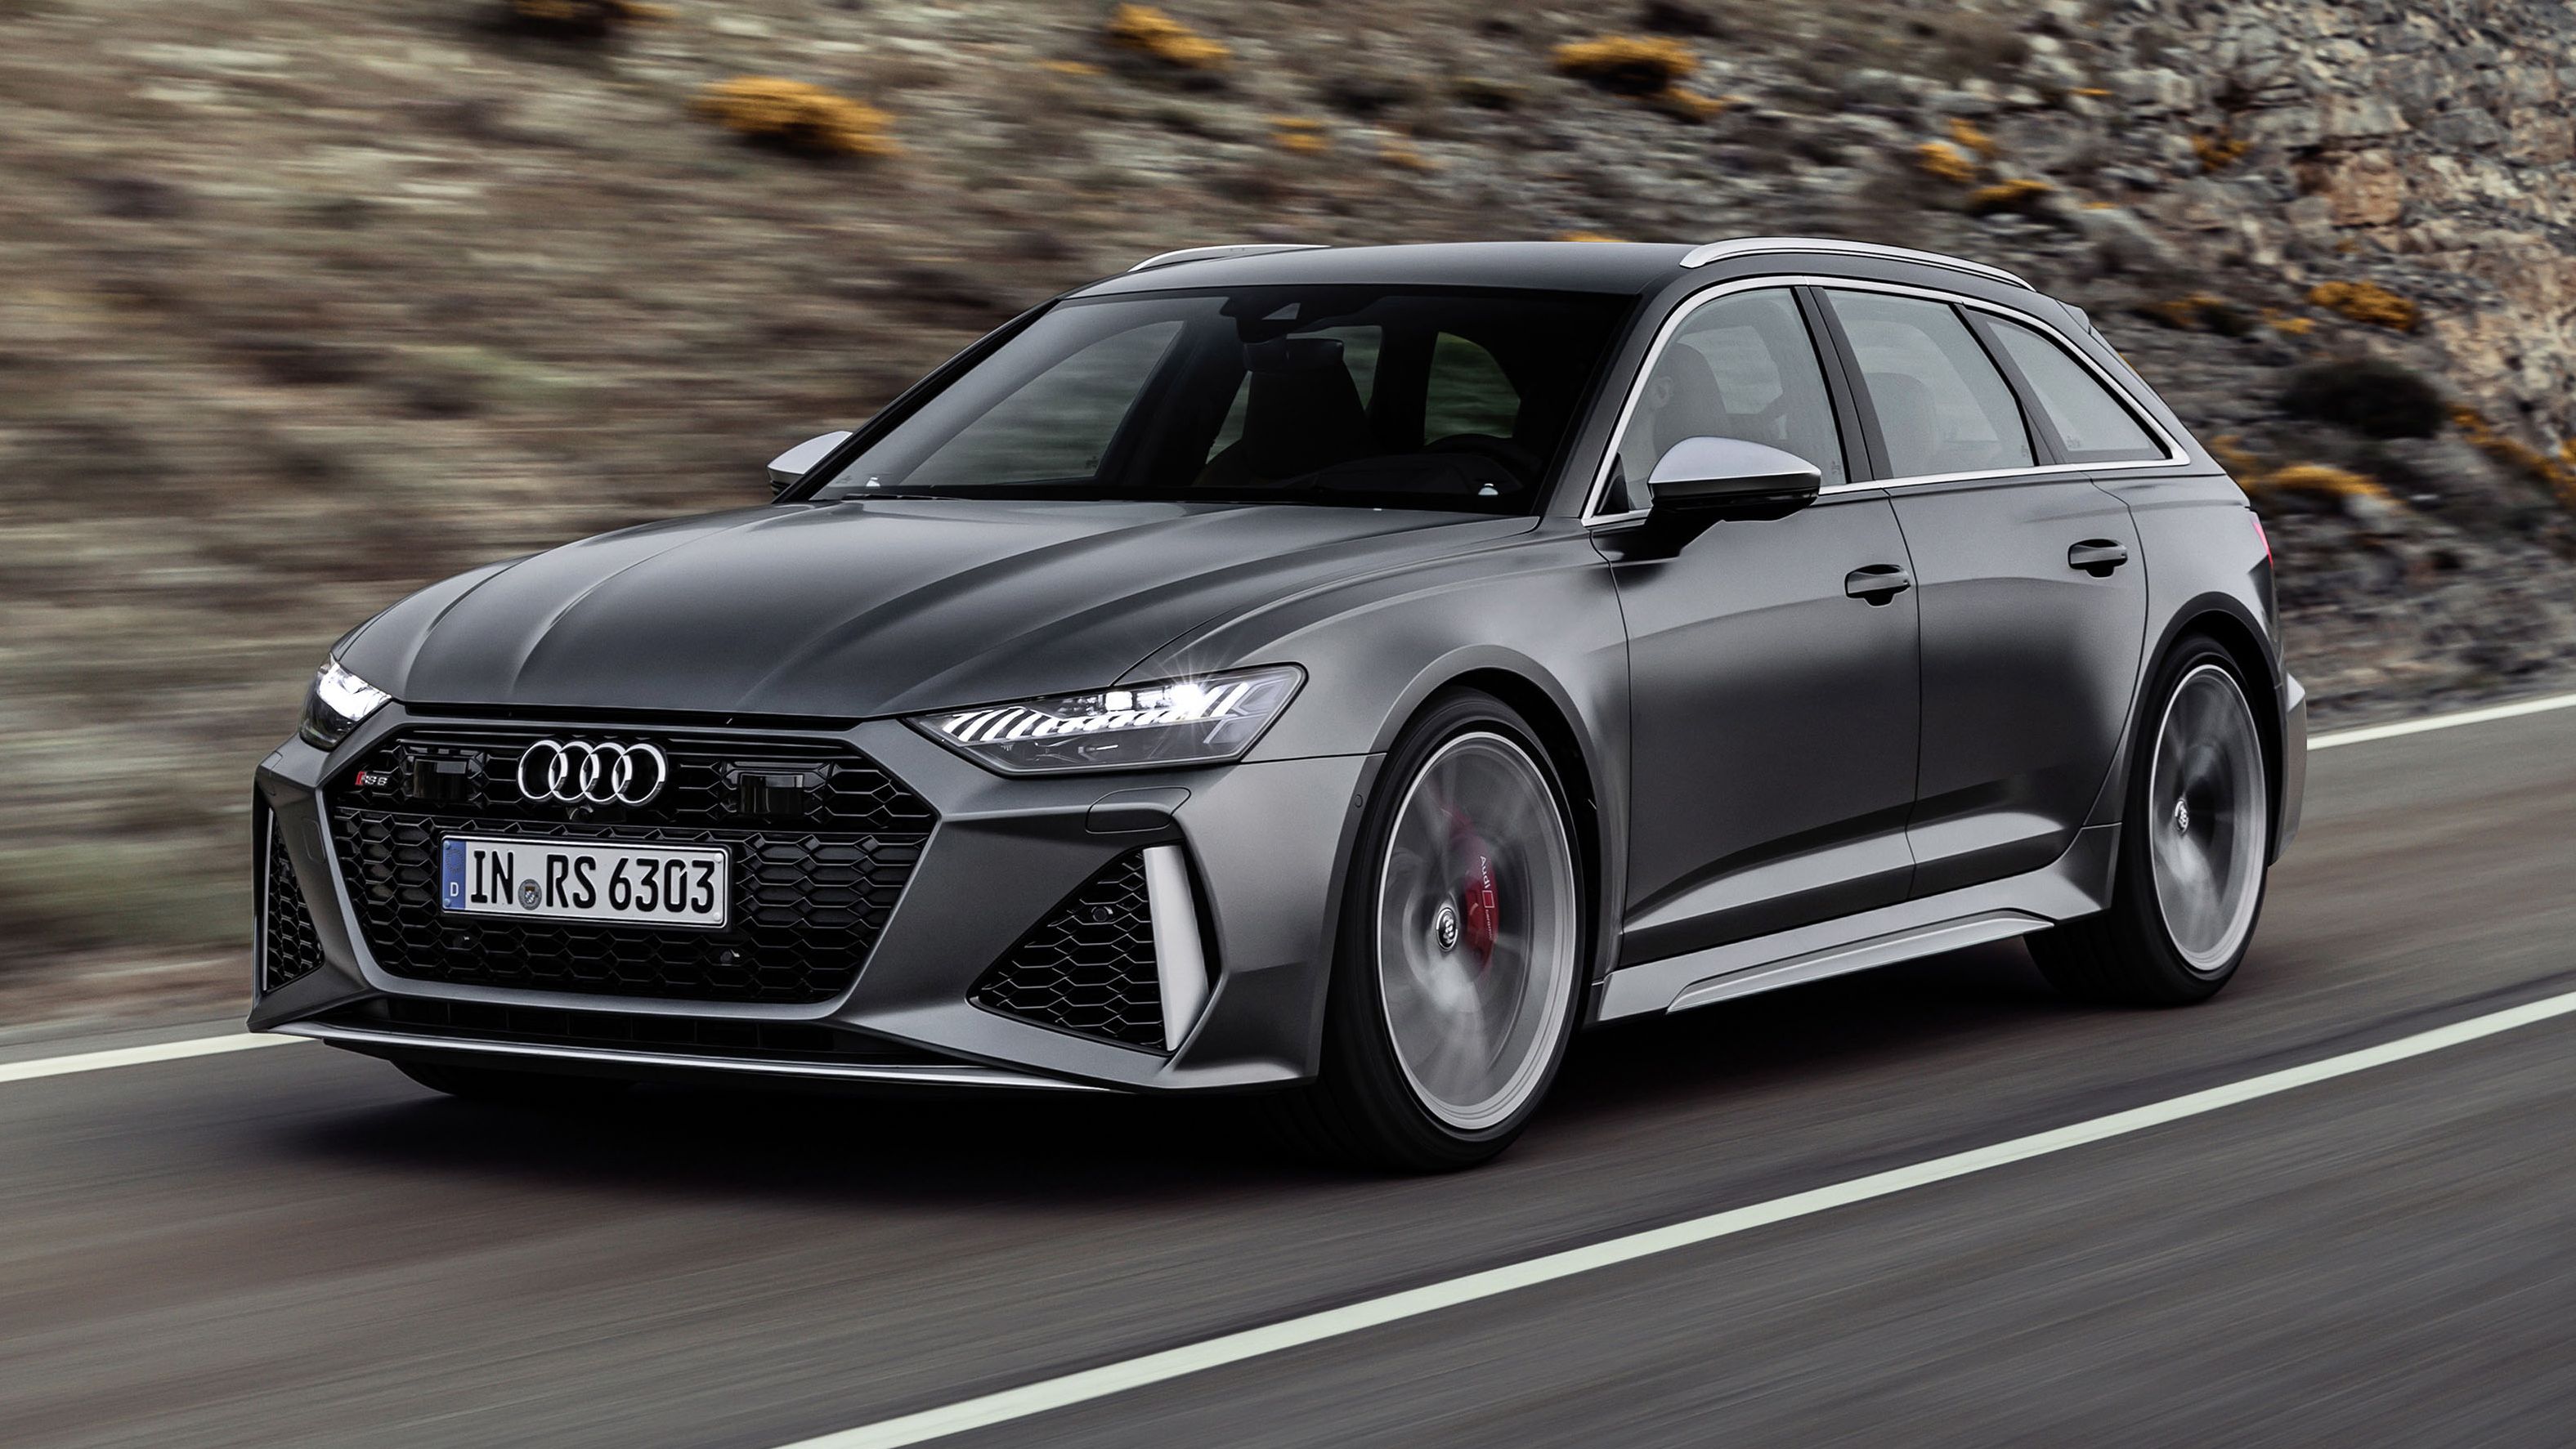 News - The All-New Audi RS6 Is The New Epitome Of Badass